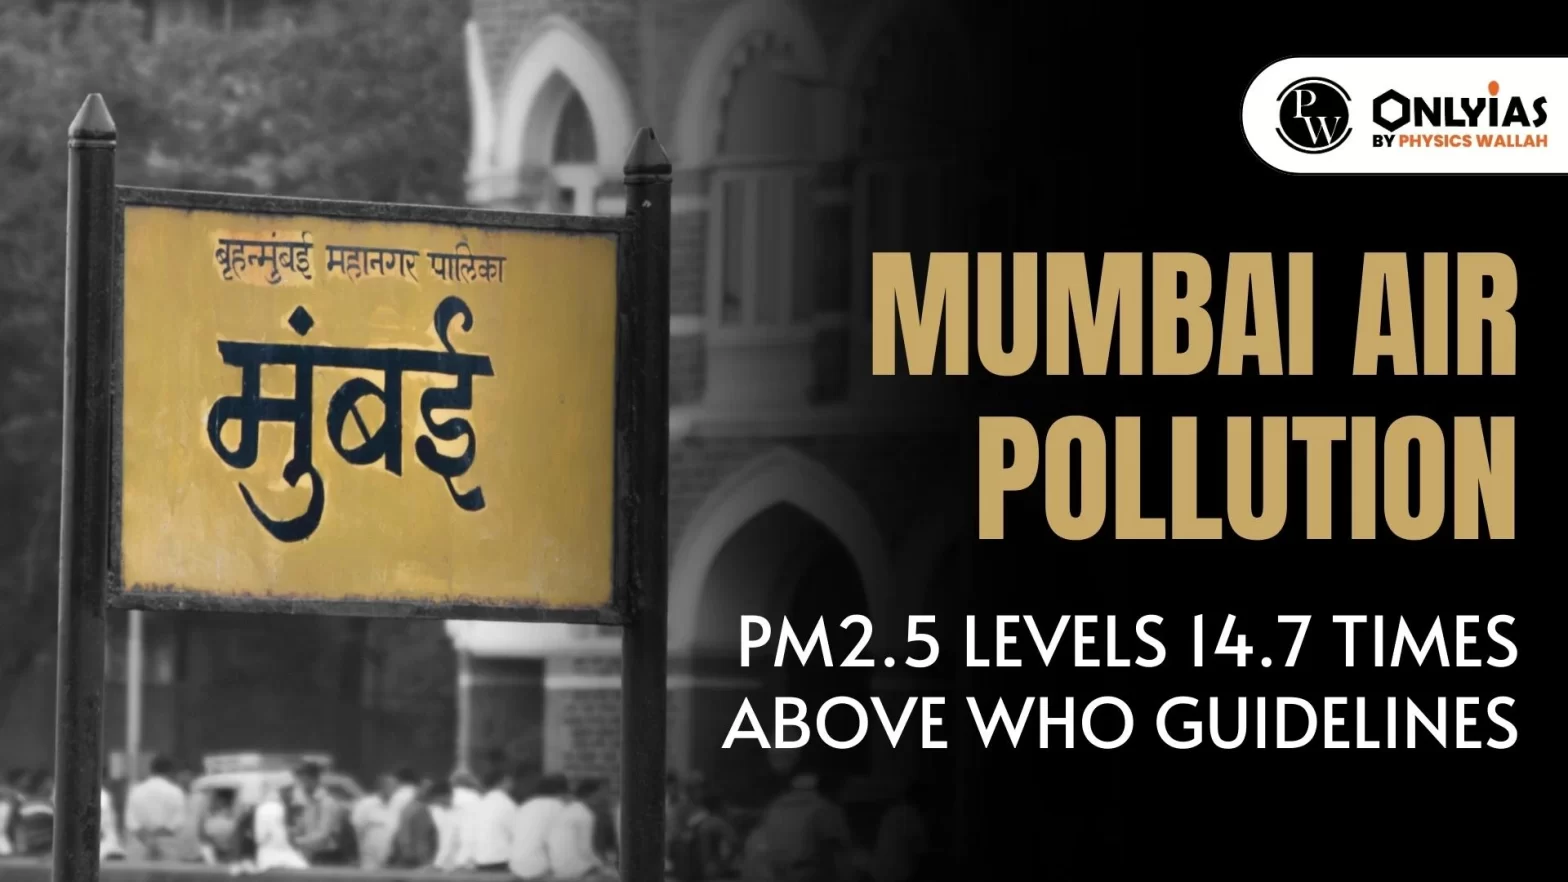 Mumbai Air Pollution: PM2.5 Levels 14.7 Times Above WHO Guidelines